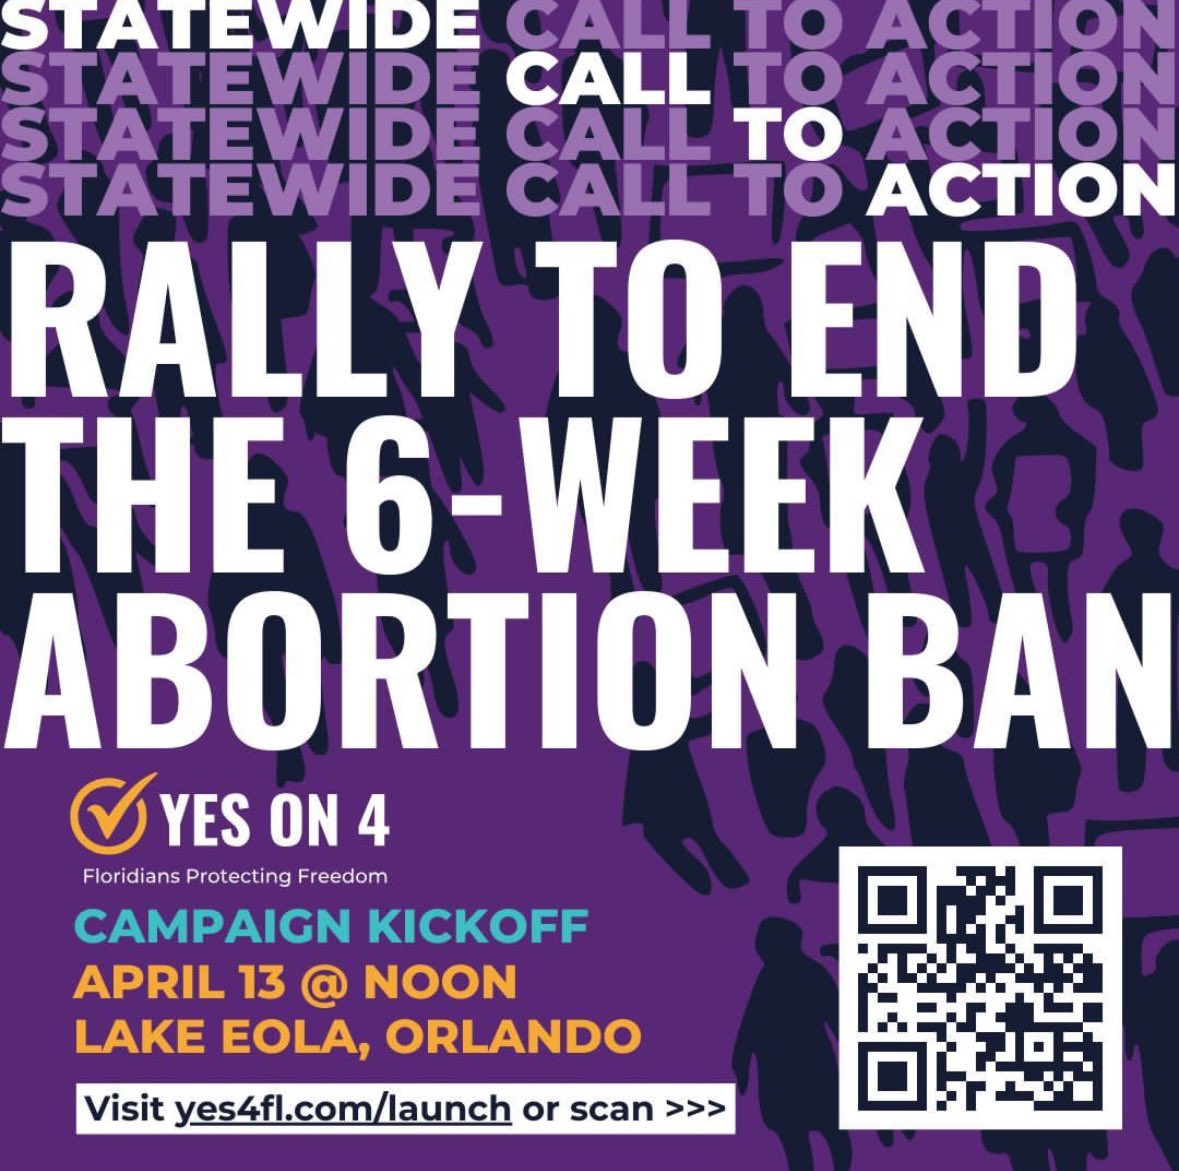 Floridians are coming together to send a clear message - we need to vote YES on Amendment 4 and stop Florida’s 6-week abortion ban. Join the @yes4florida campaign on April 13th in Orlando so we can show our support! Sign up here: yes4fl.com/launch